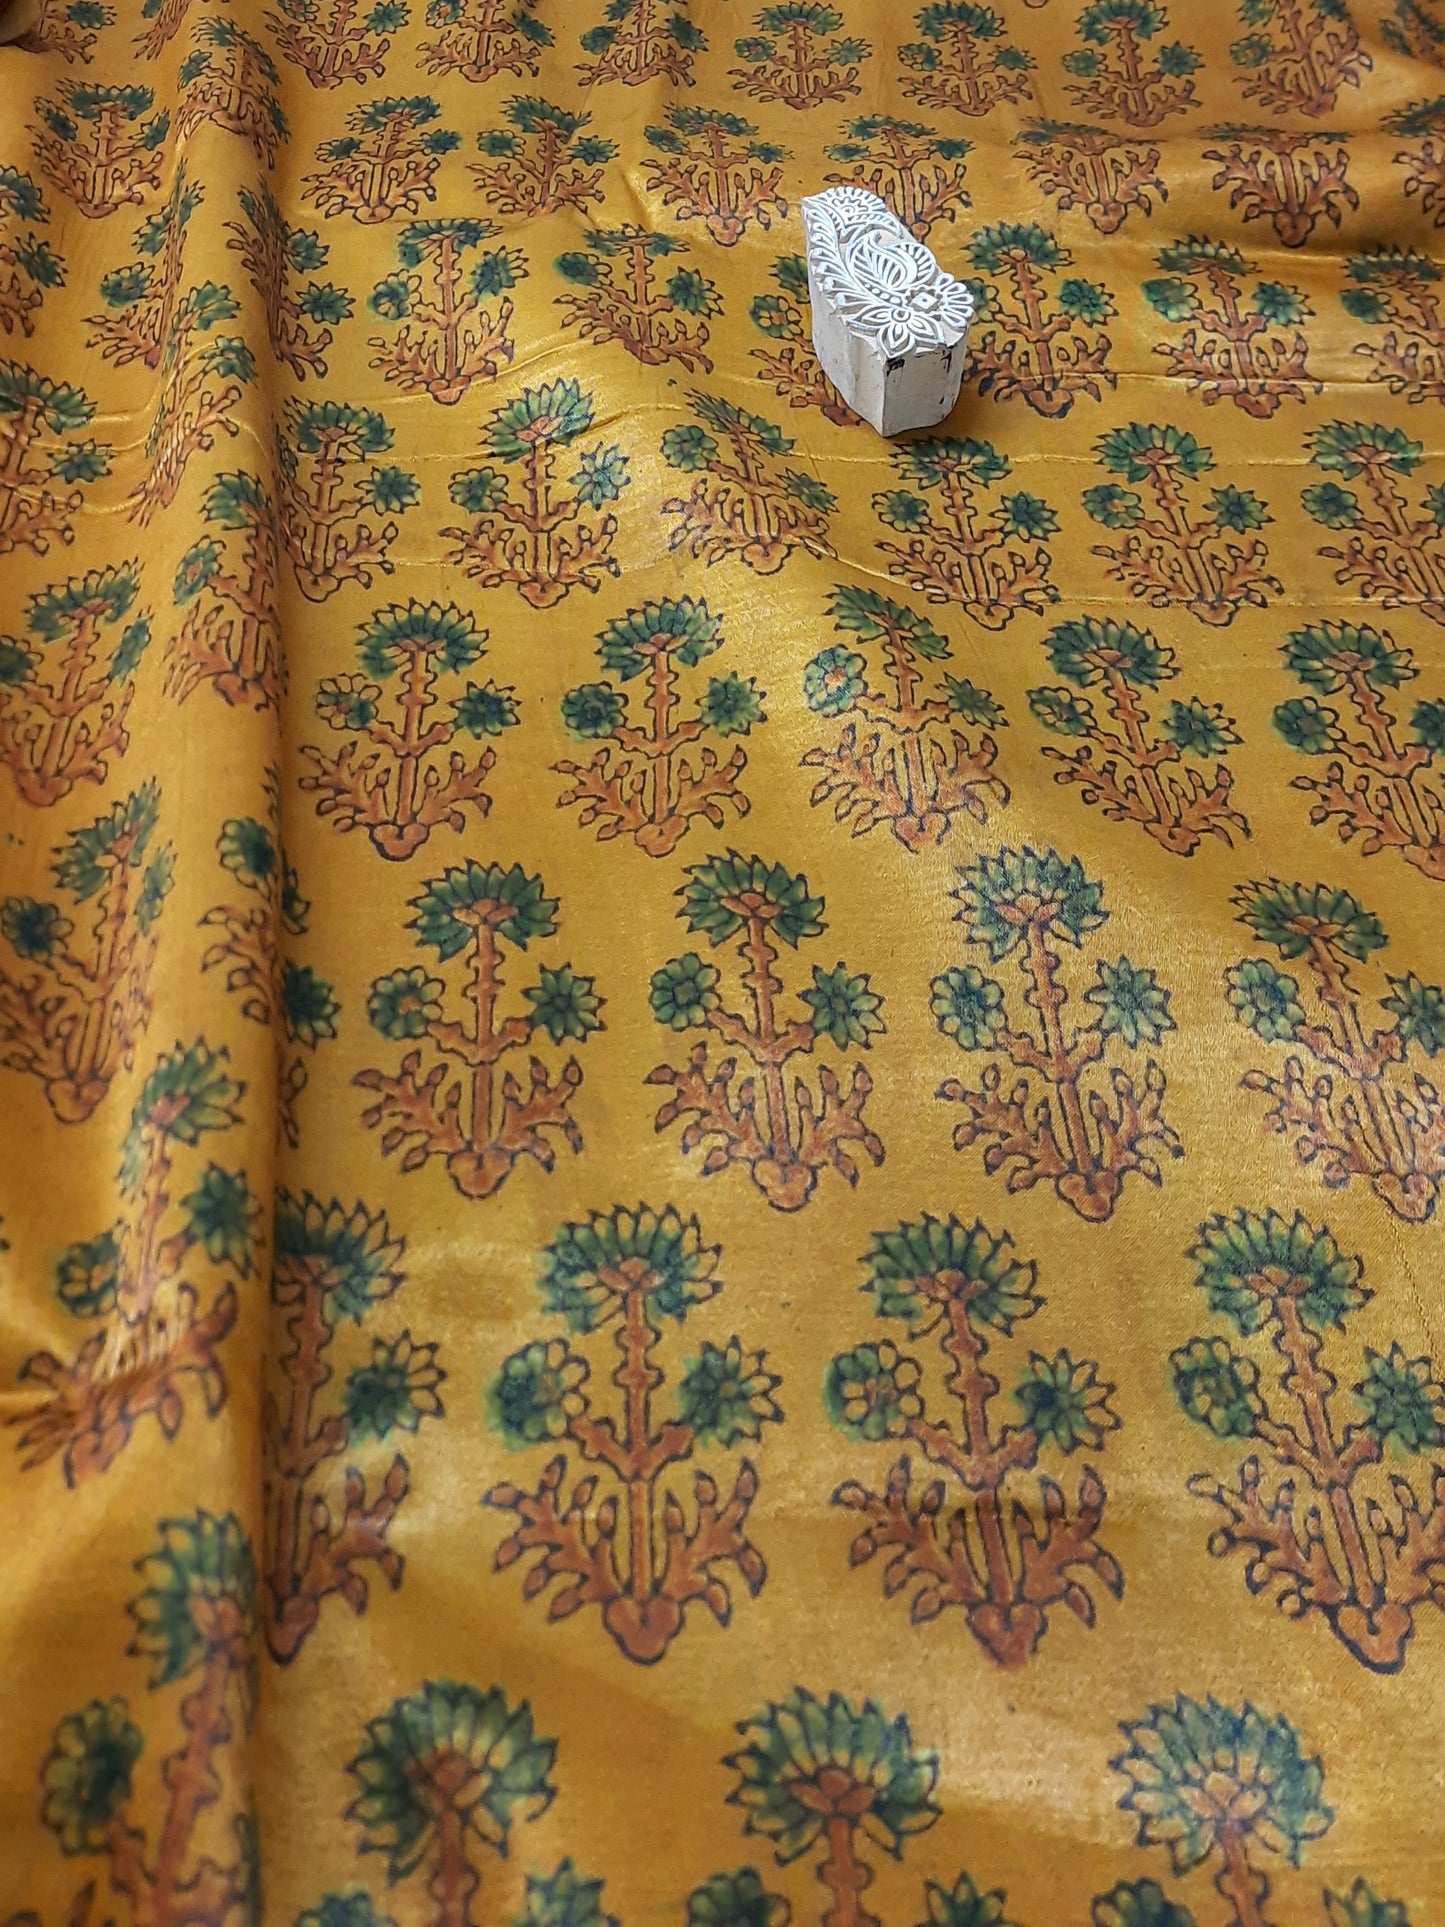 Experience the opulent touch of Mashru silk fabric, adorned with the exquisite ajrakh design. The one-of-a-kind turmeric dye adds to the fabric's charm and promotes sustainable fashion. Create your own stunning design with our eco-friendly, luxurious fabric for an elegant aesthetic.